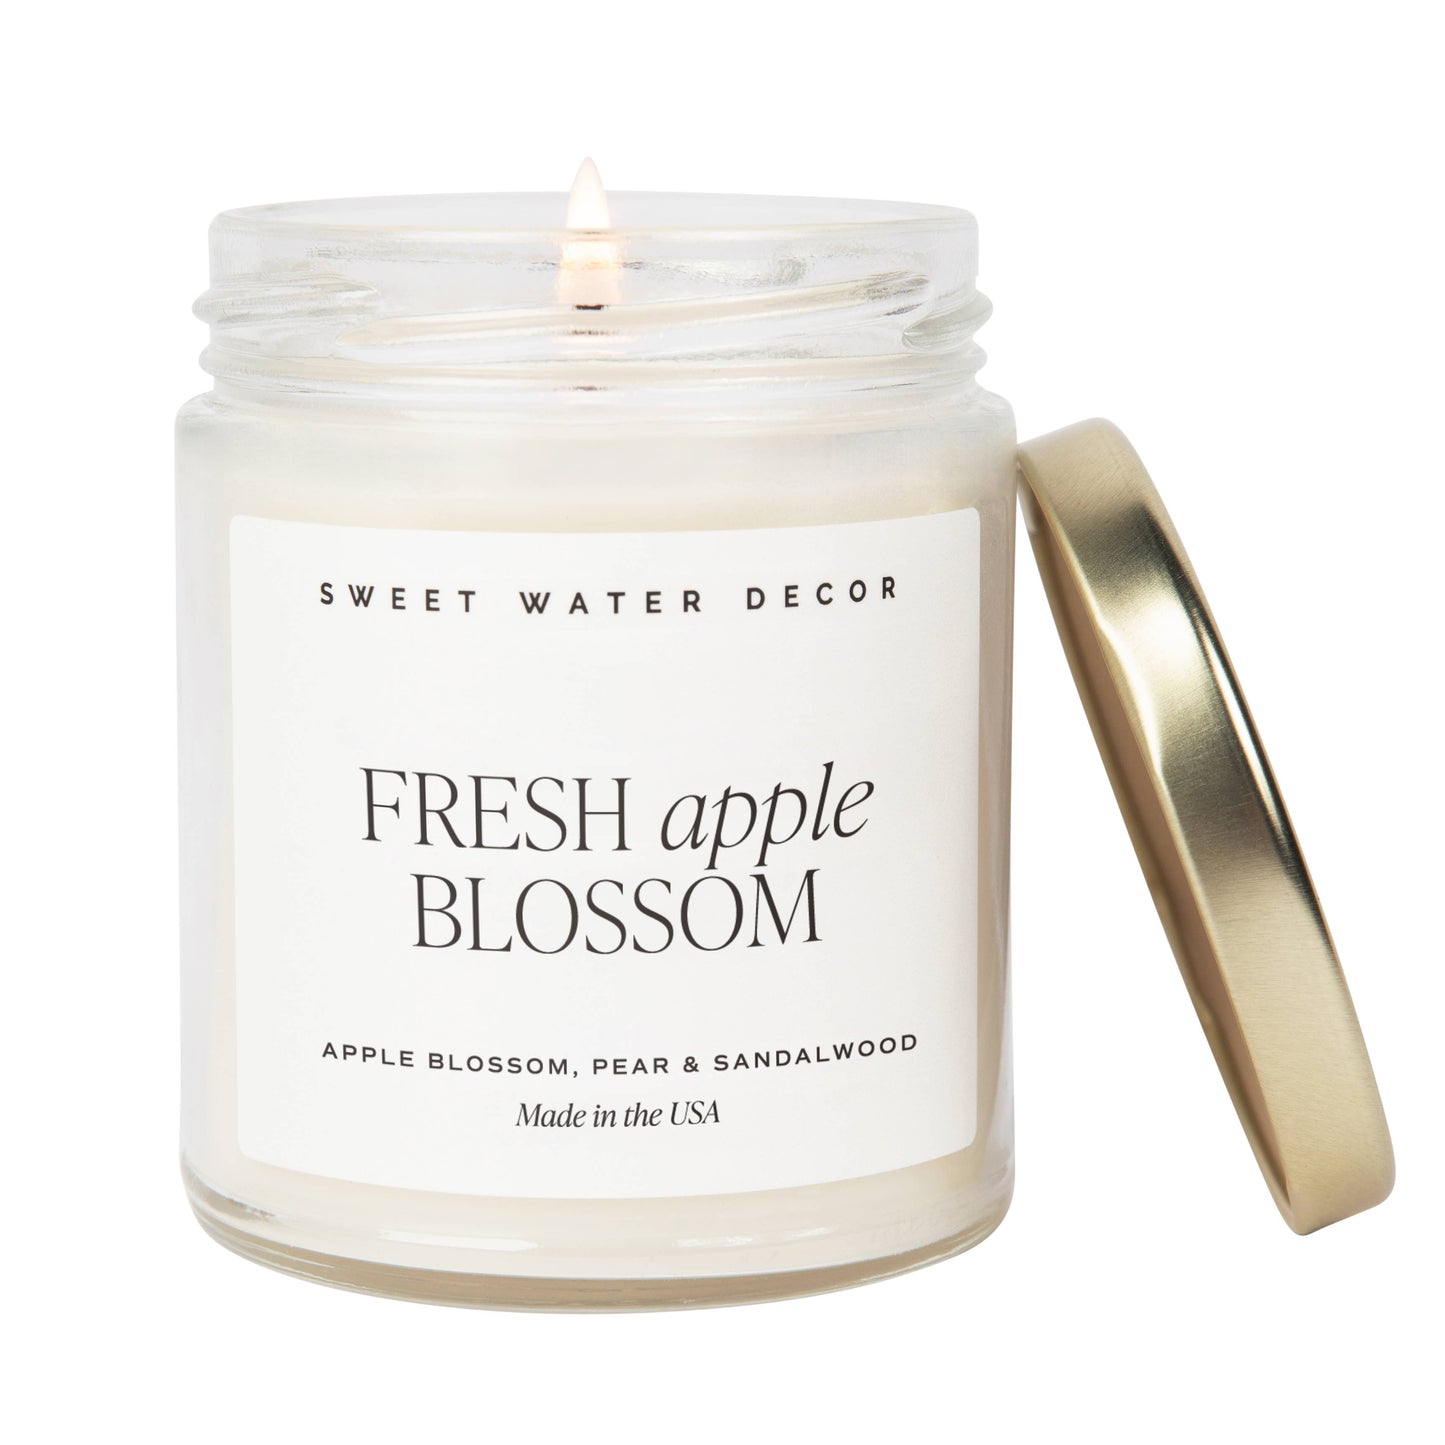 Sweet Water Decor - *NEW* Fresh Apple Blossom 9 oz Soy Candle - Decor & Gifts